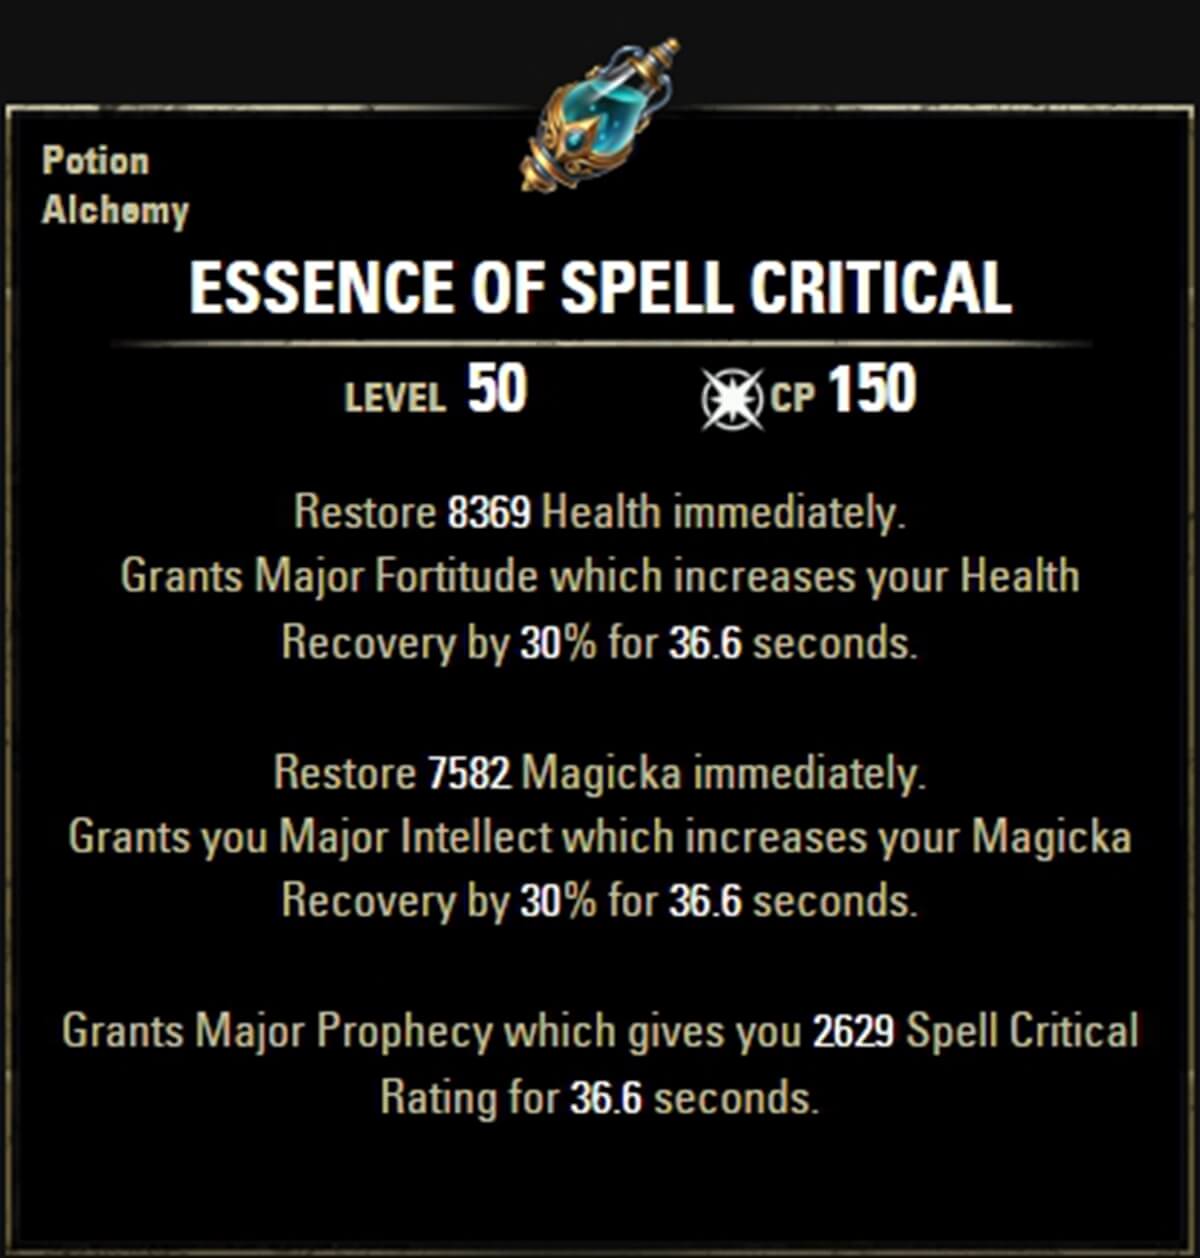 5 Best Potions in ESO - Essence of Spell Critical